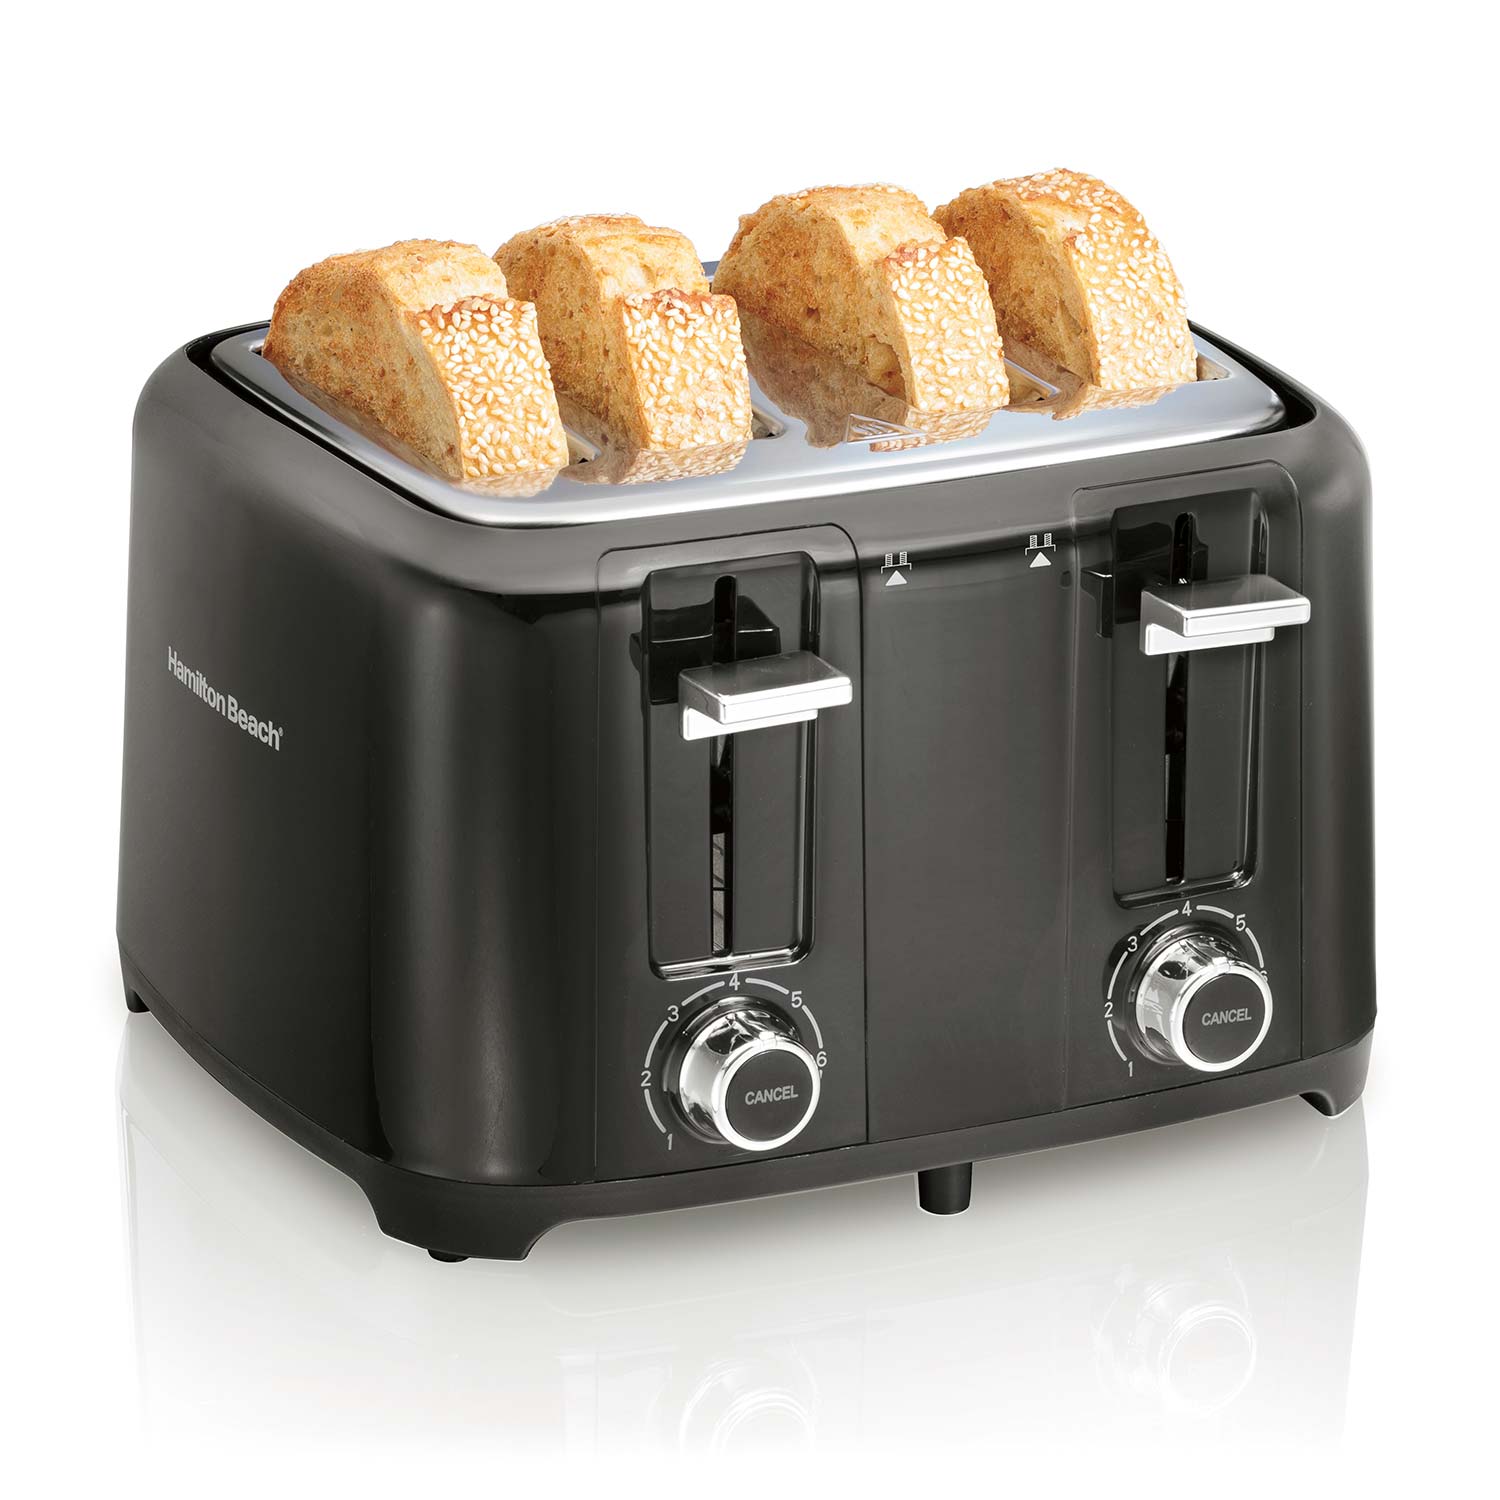 4 Slice Toaster with Extra-Wide Slots (24217)